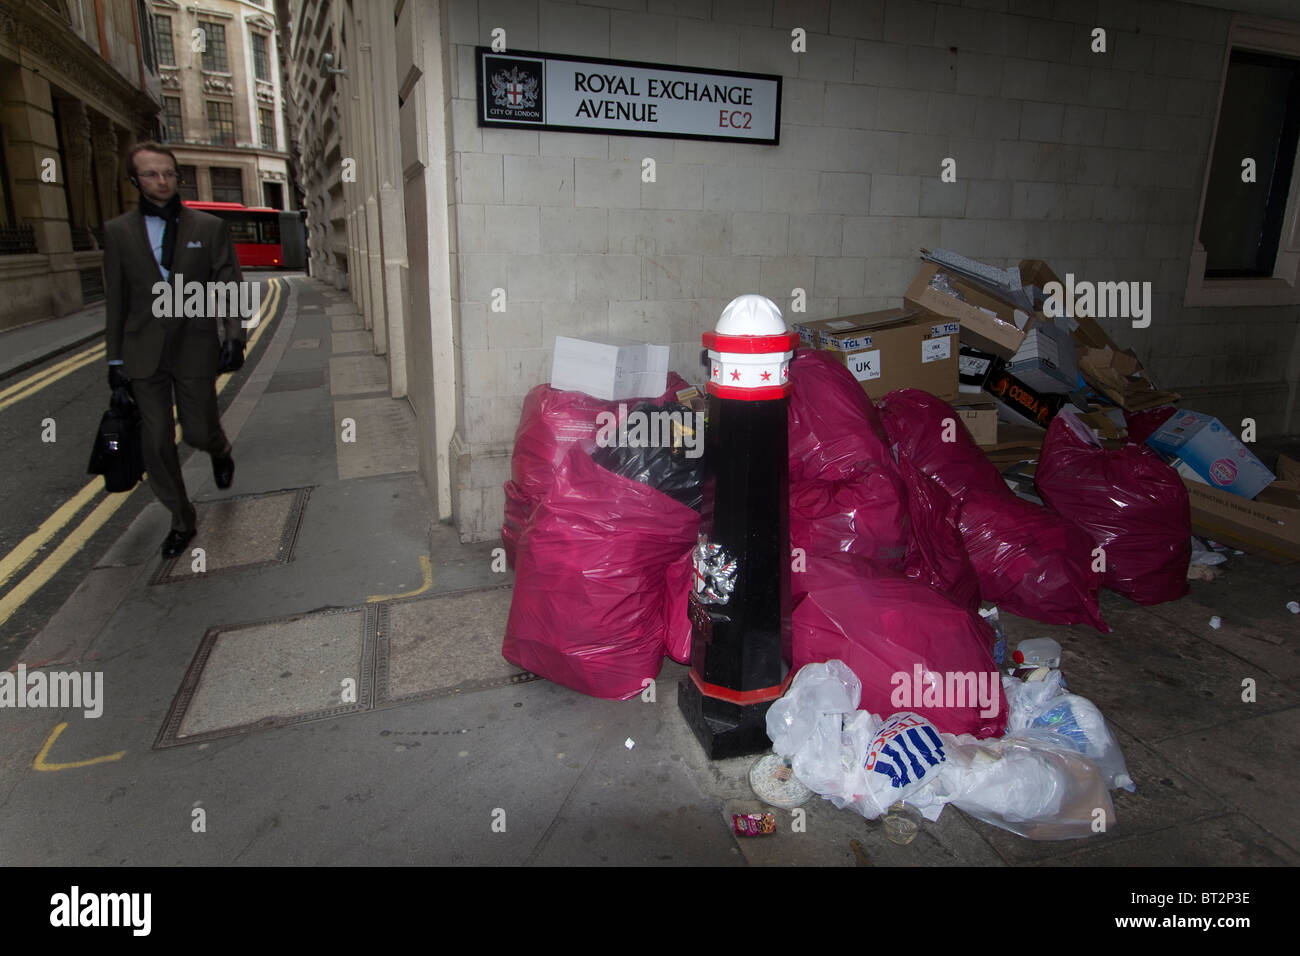 Rubbish piled up in the city of London, bags of trash litter Royal exchange avenue Stock Photo